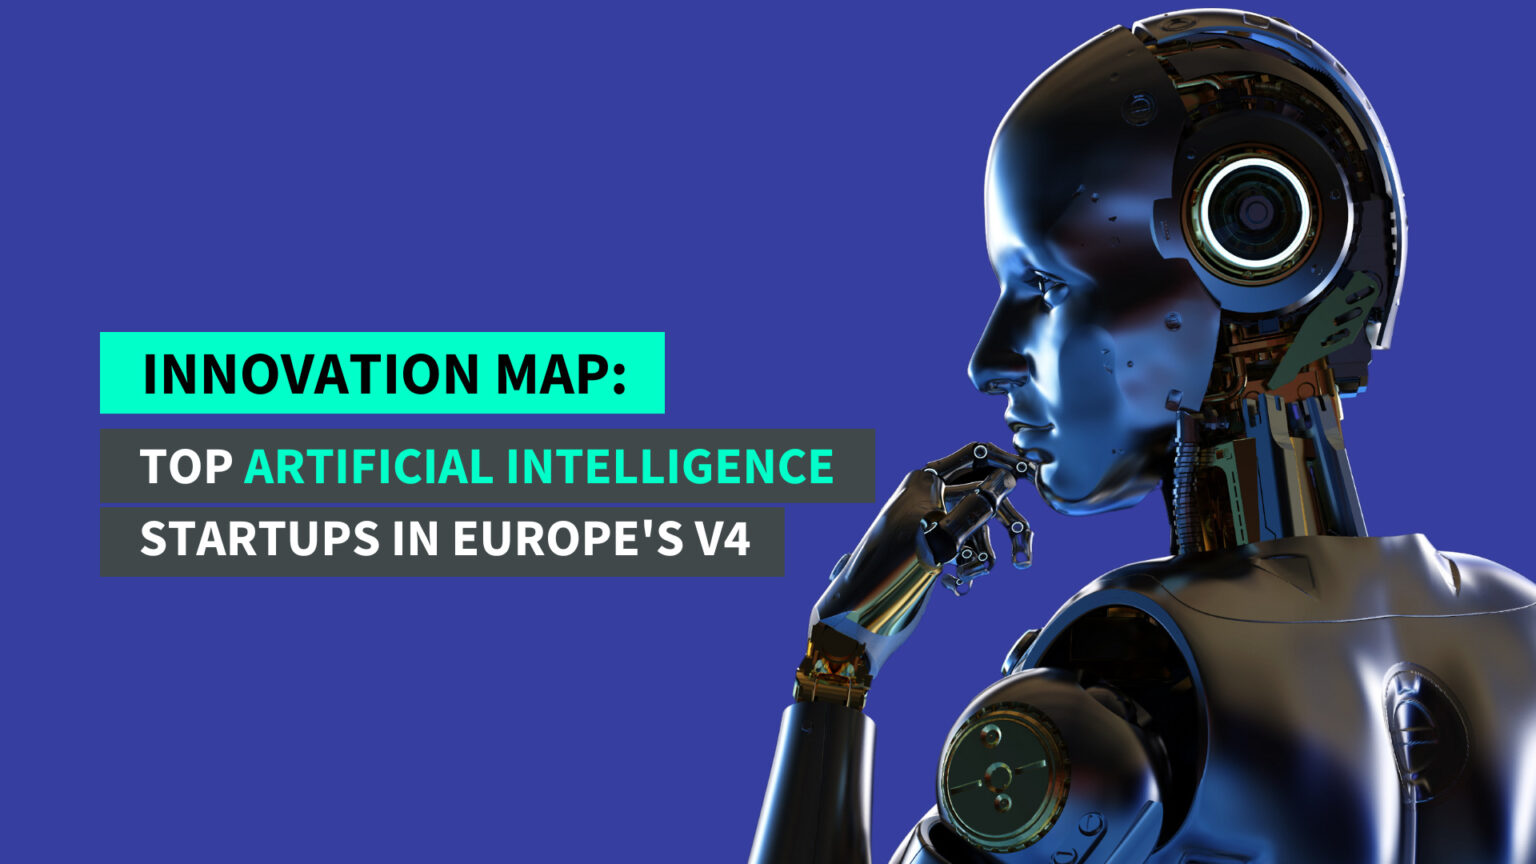 Innovation Map: Top AI startups in Europe's V4